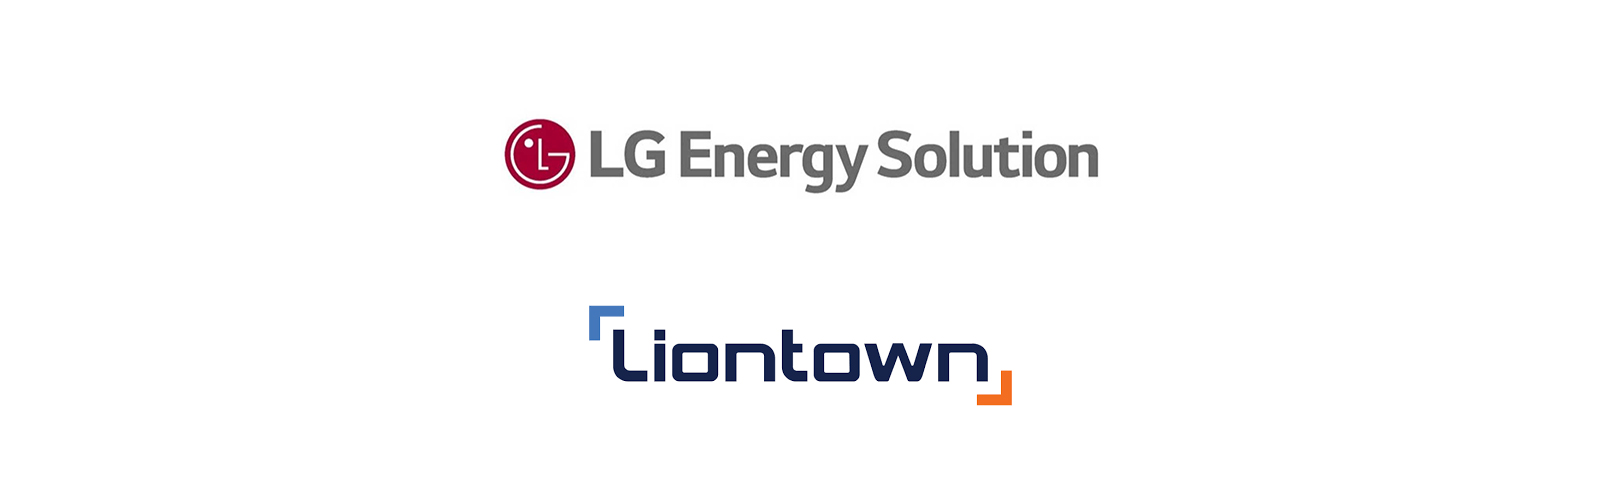 LG Energy Solution and Liontown Resources fortify their collaboration in the global lithium sector